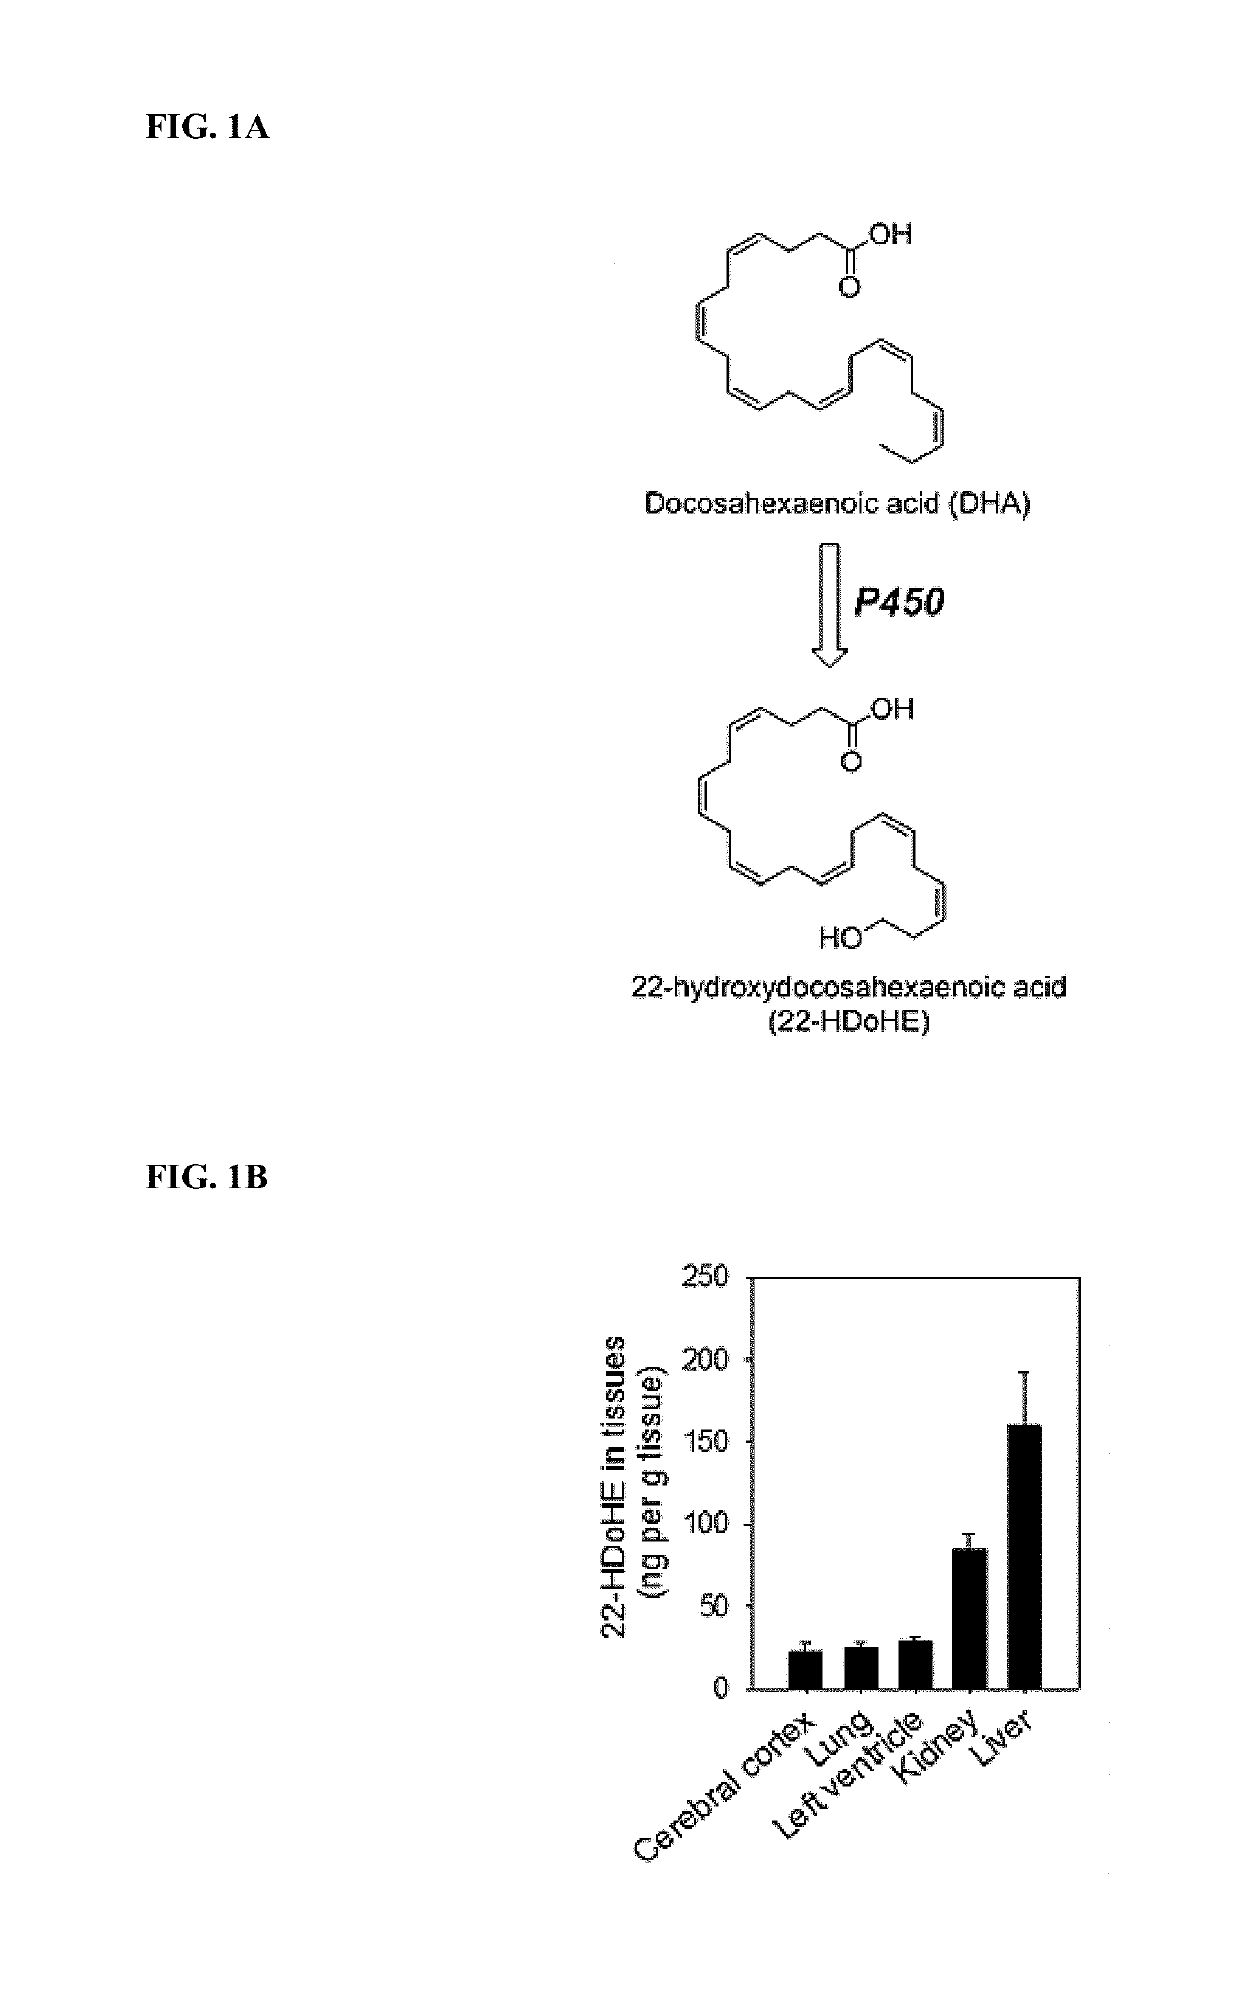 Synthesis and use of omega-hydroxylated polyunsaturated fatty acids